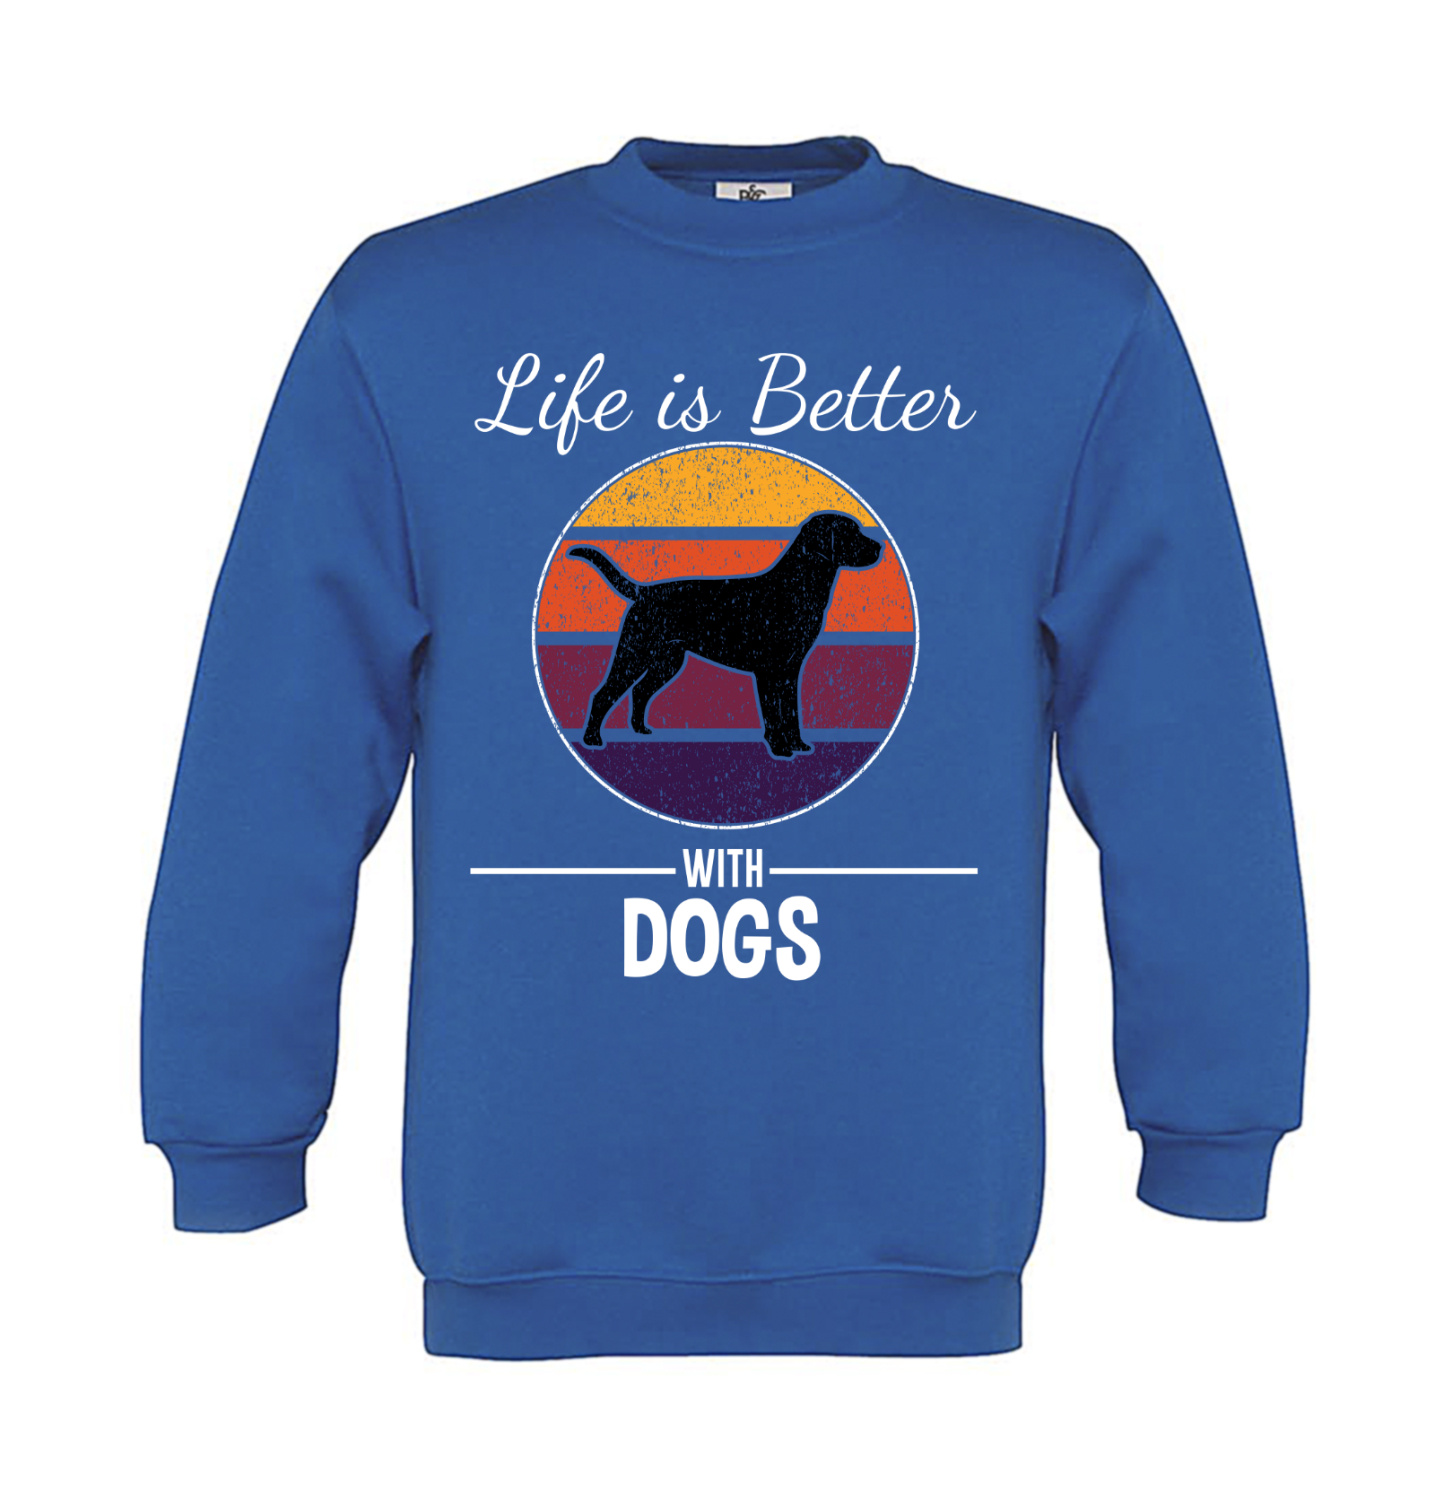 Sweatshirt Kinder Hunde - Life is Better with Dogs